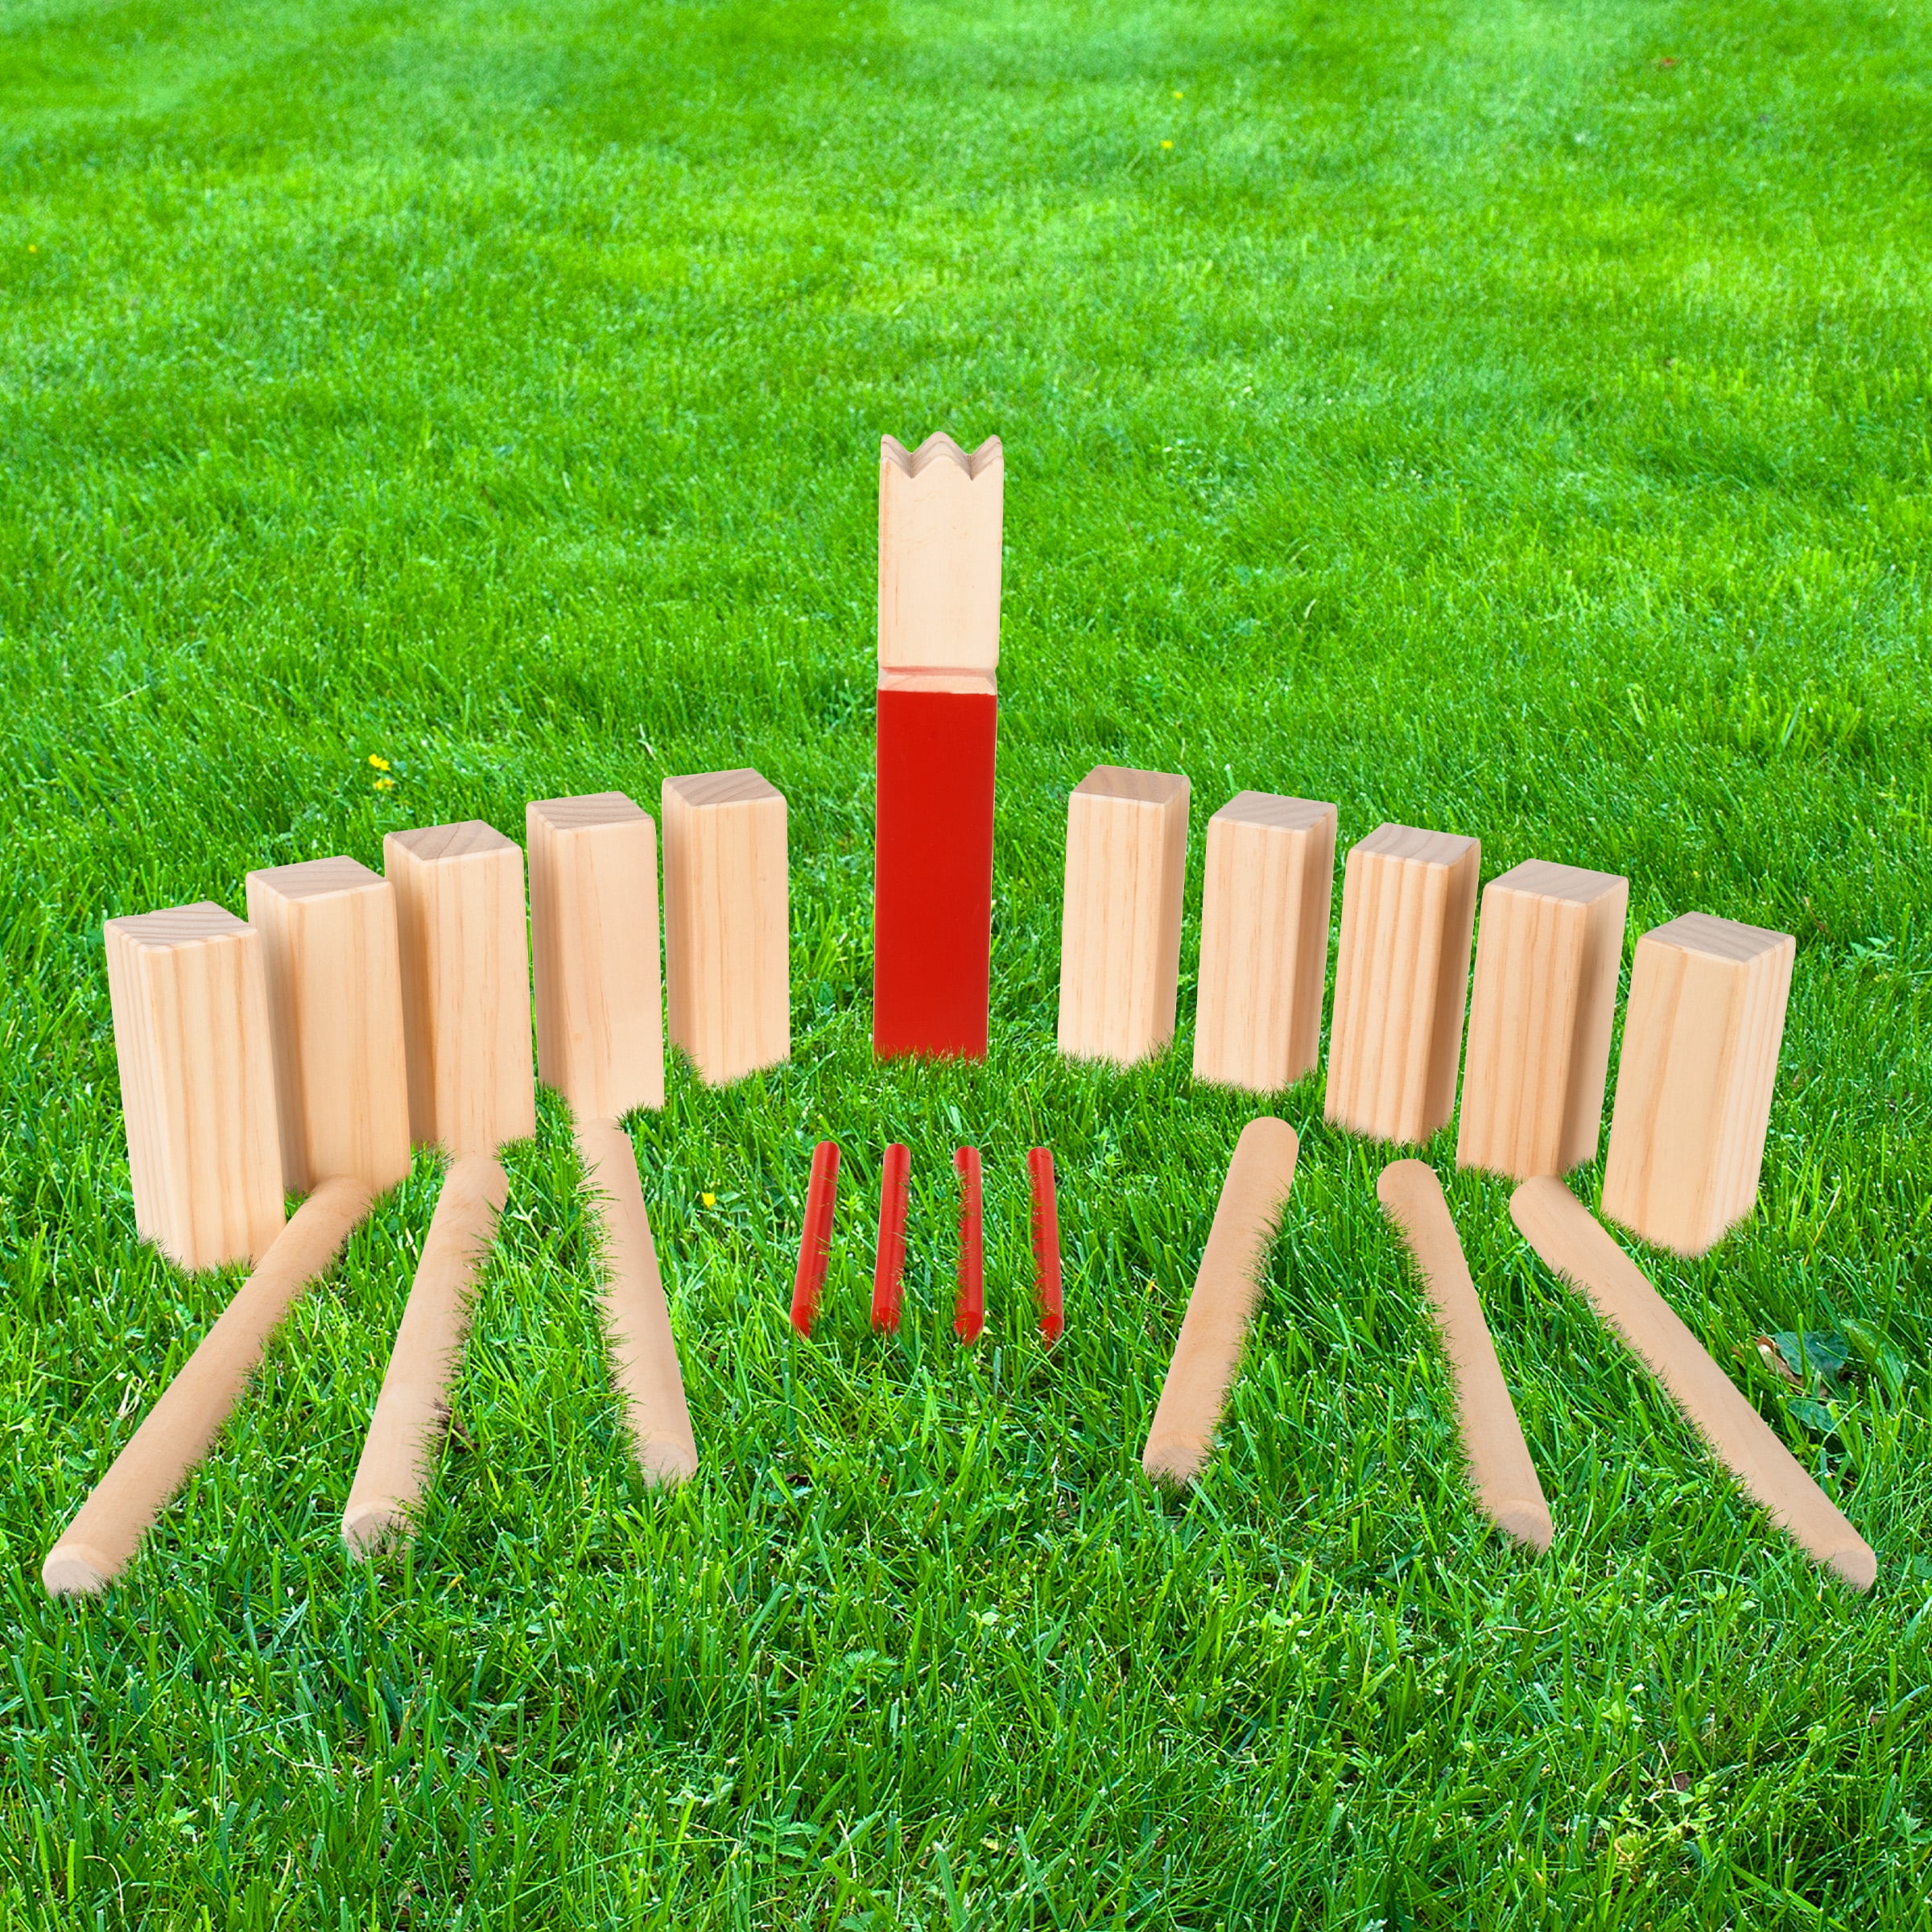 LAWN TIME Kubb Game Set Kubb Viking Lawn Game with Carry Bag Rubberwood Viking Chess Outdoor Game 